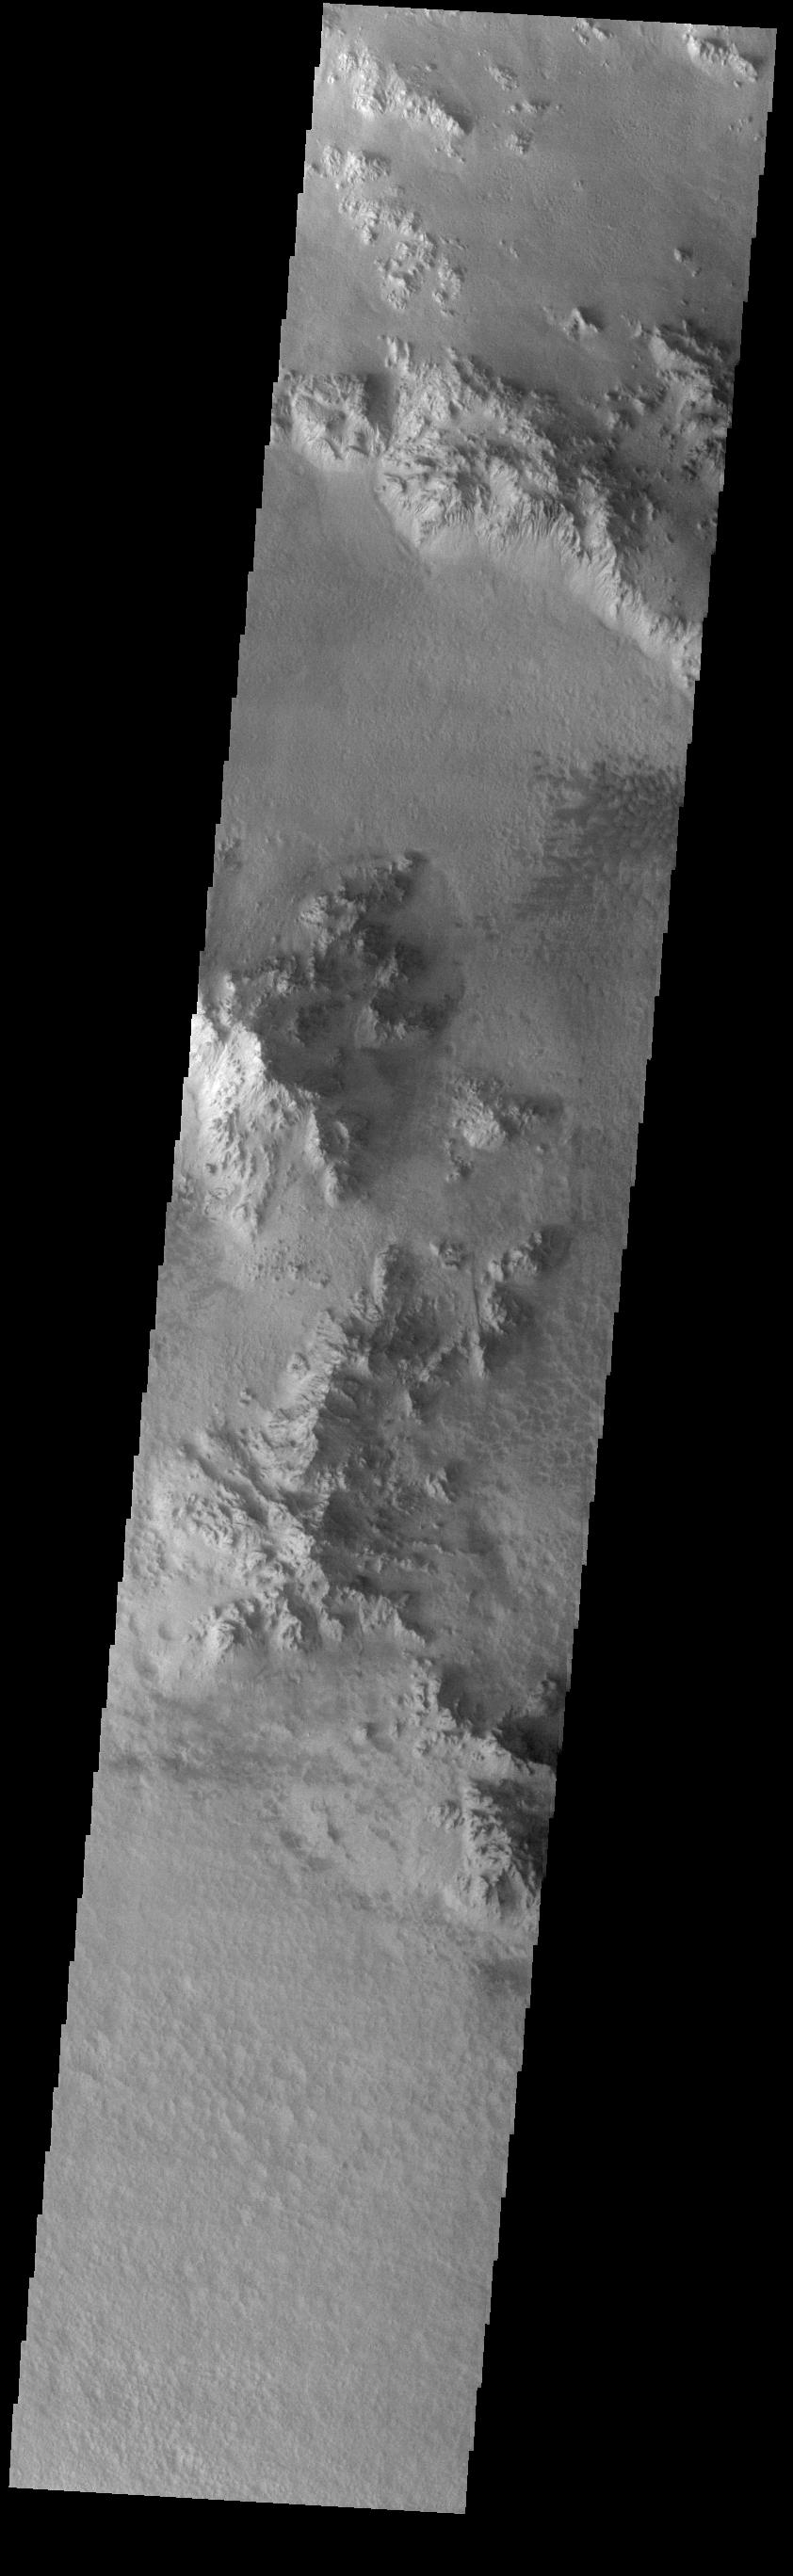 PIA22994: Hale Crater